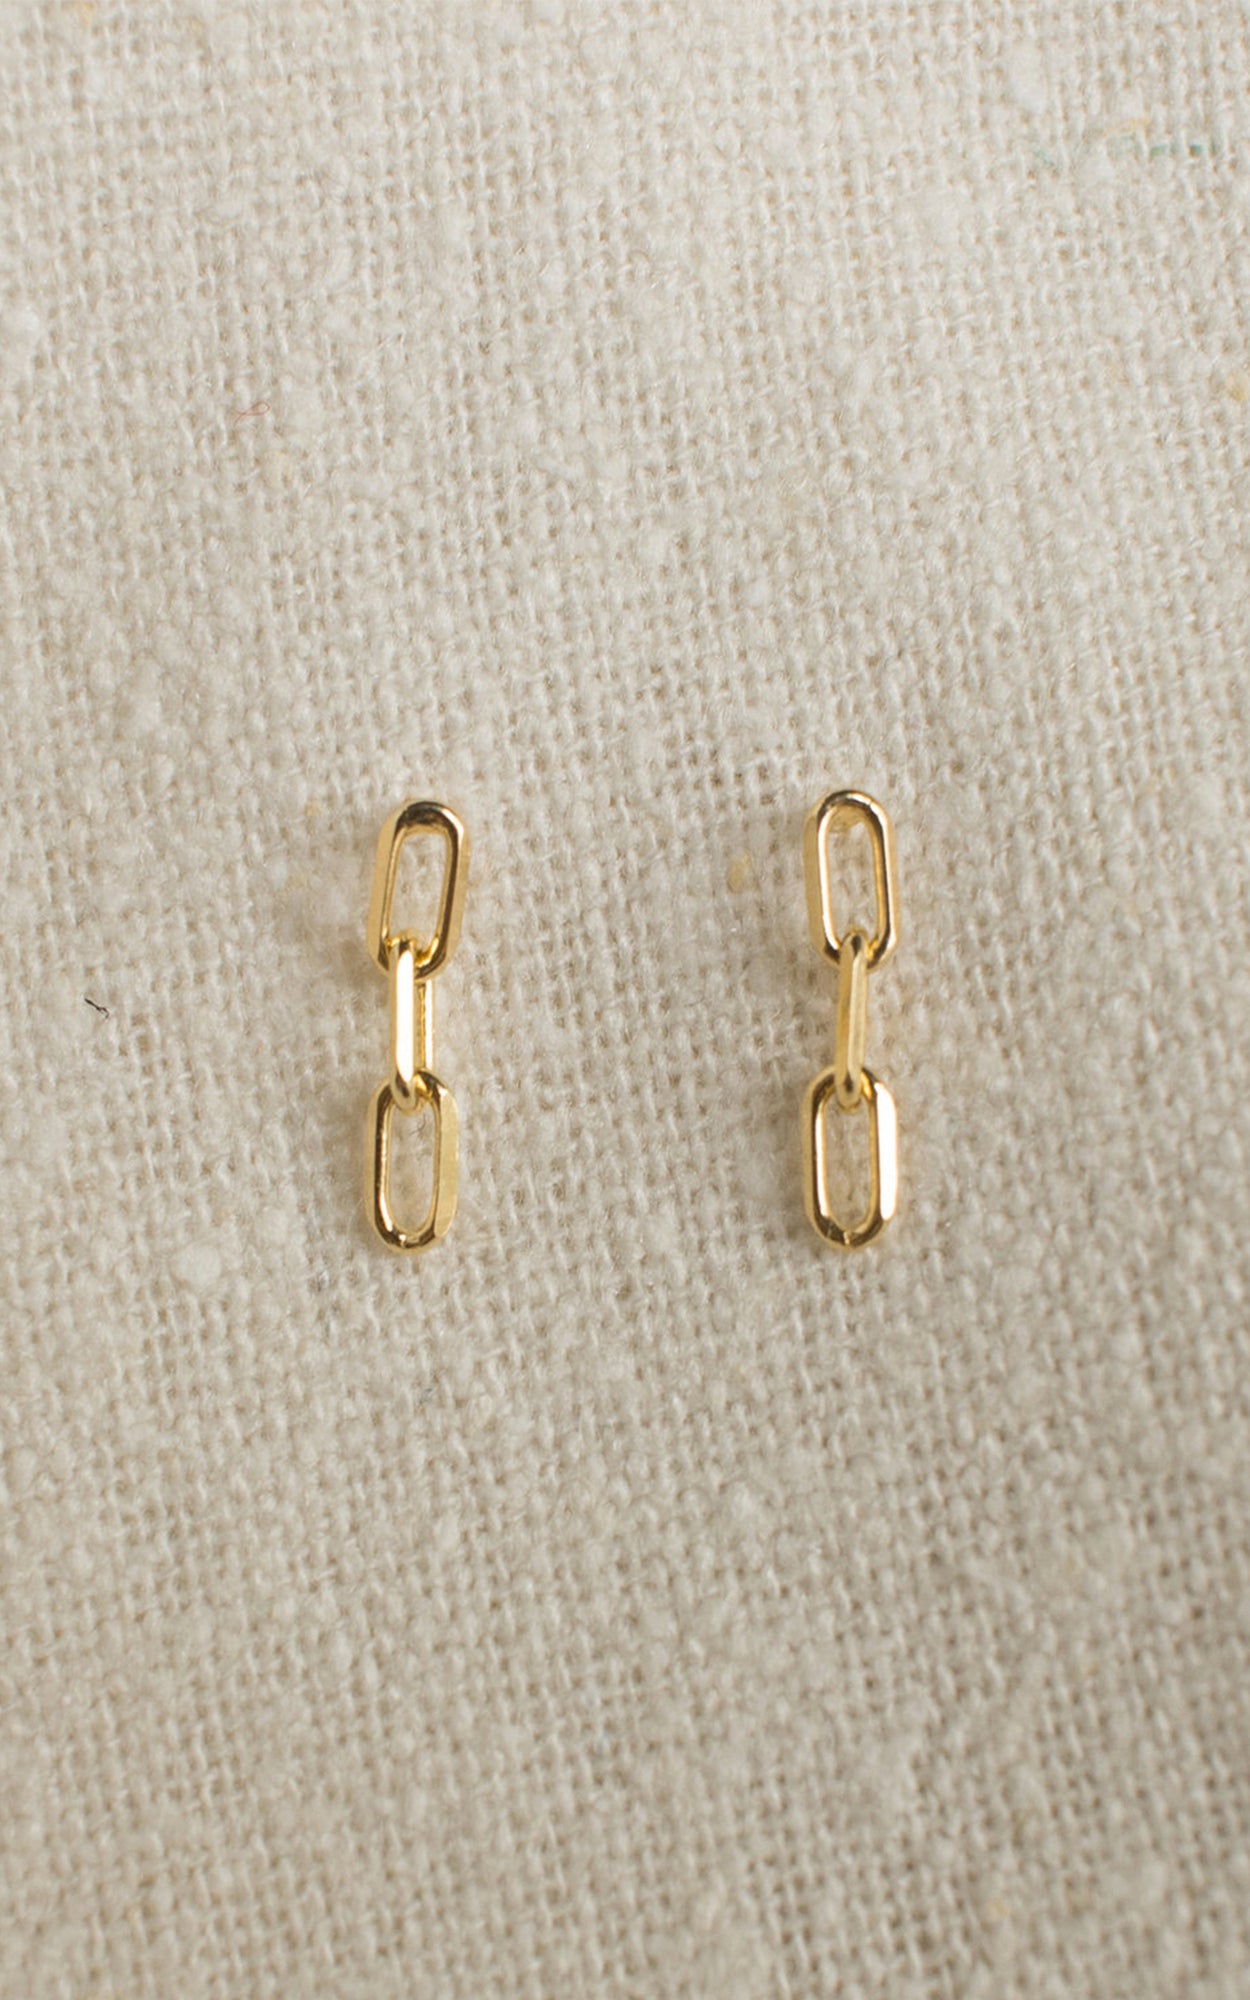 LINK I STUDS // GOLD PLATED